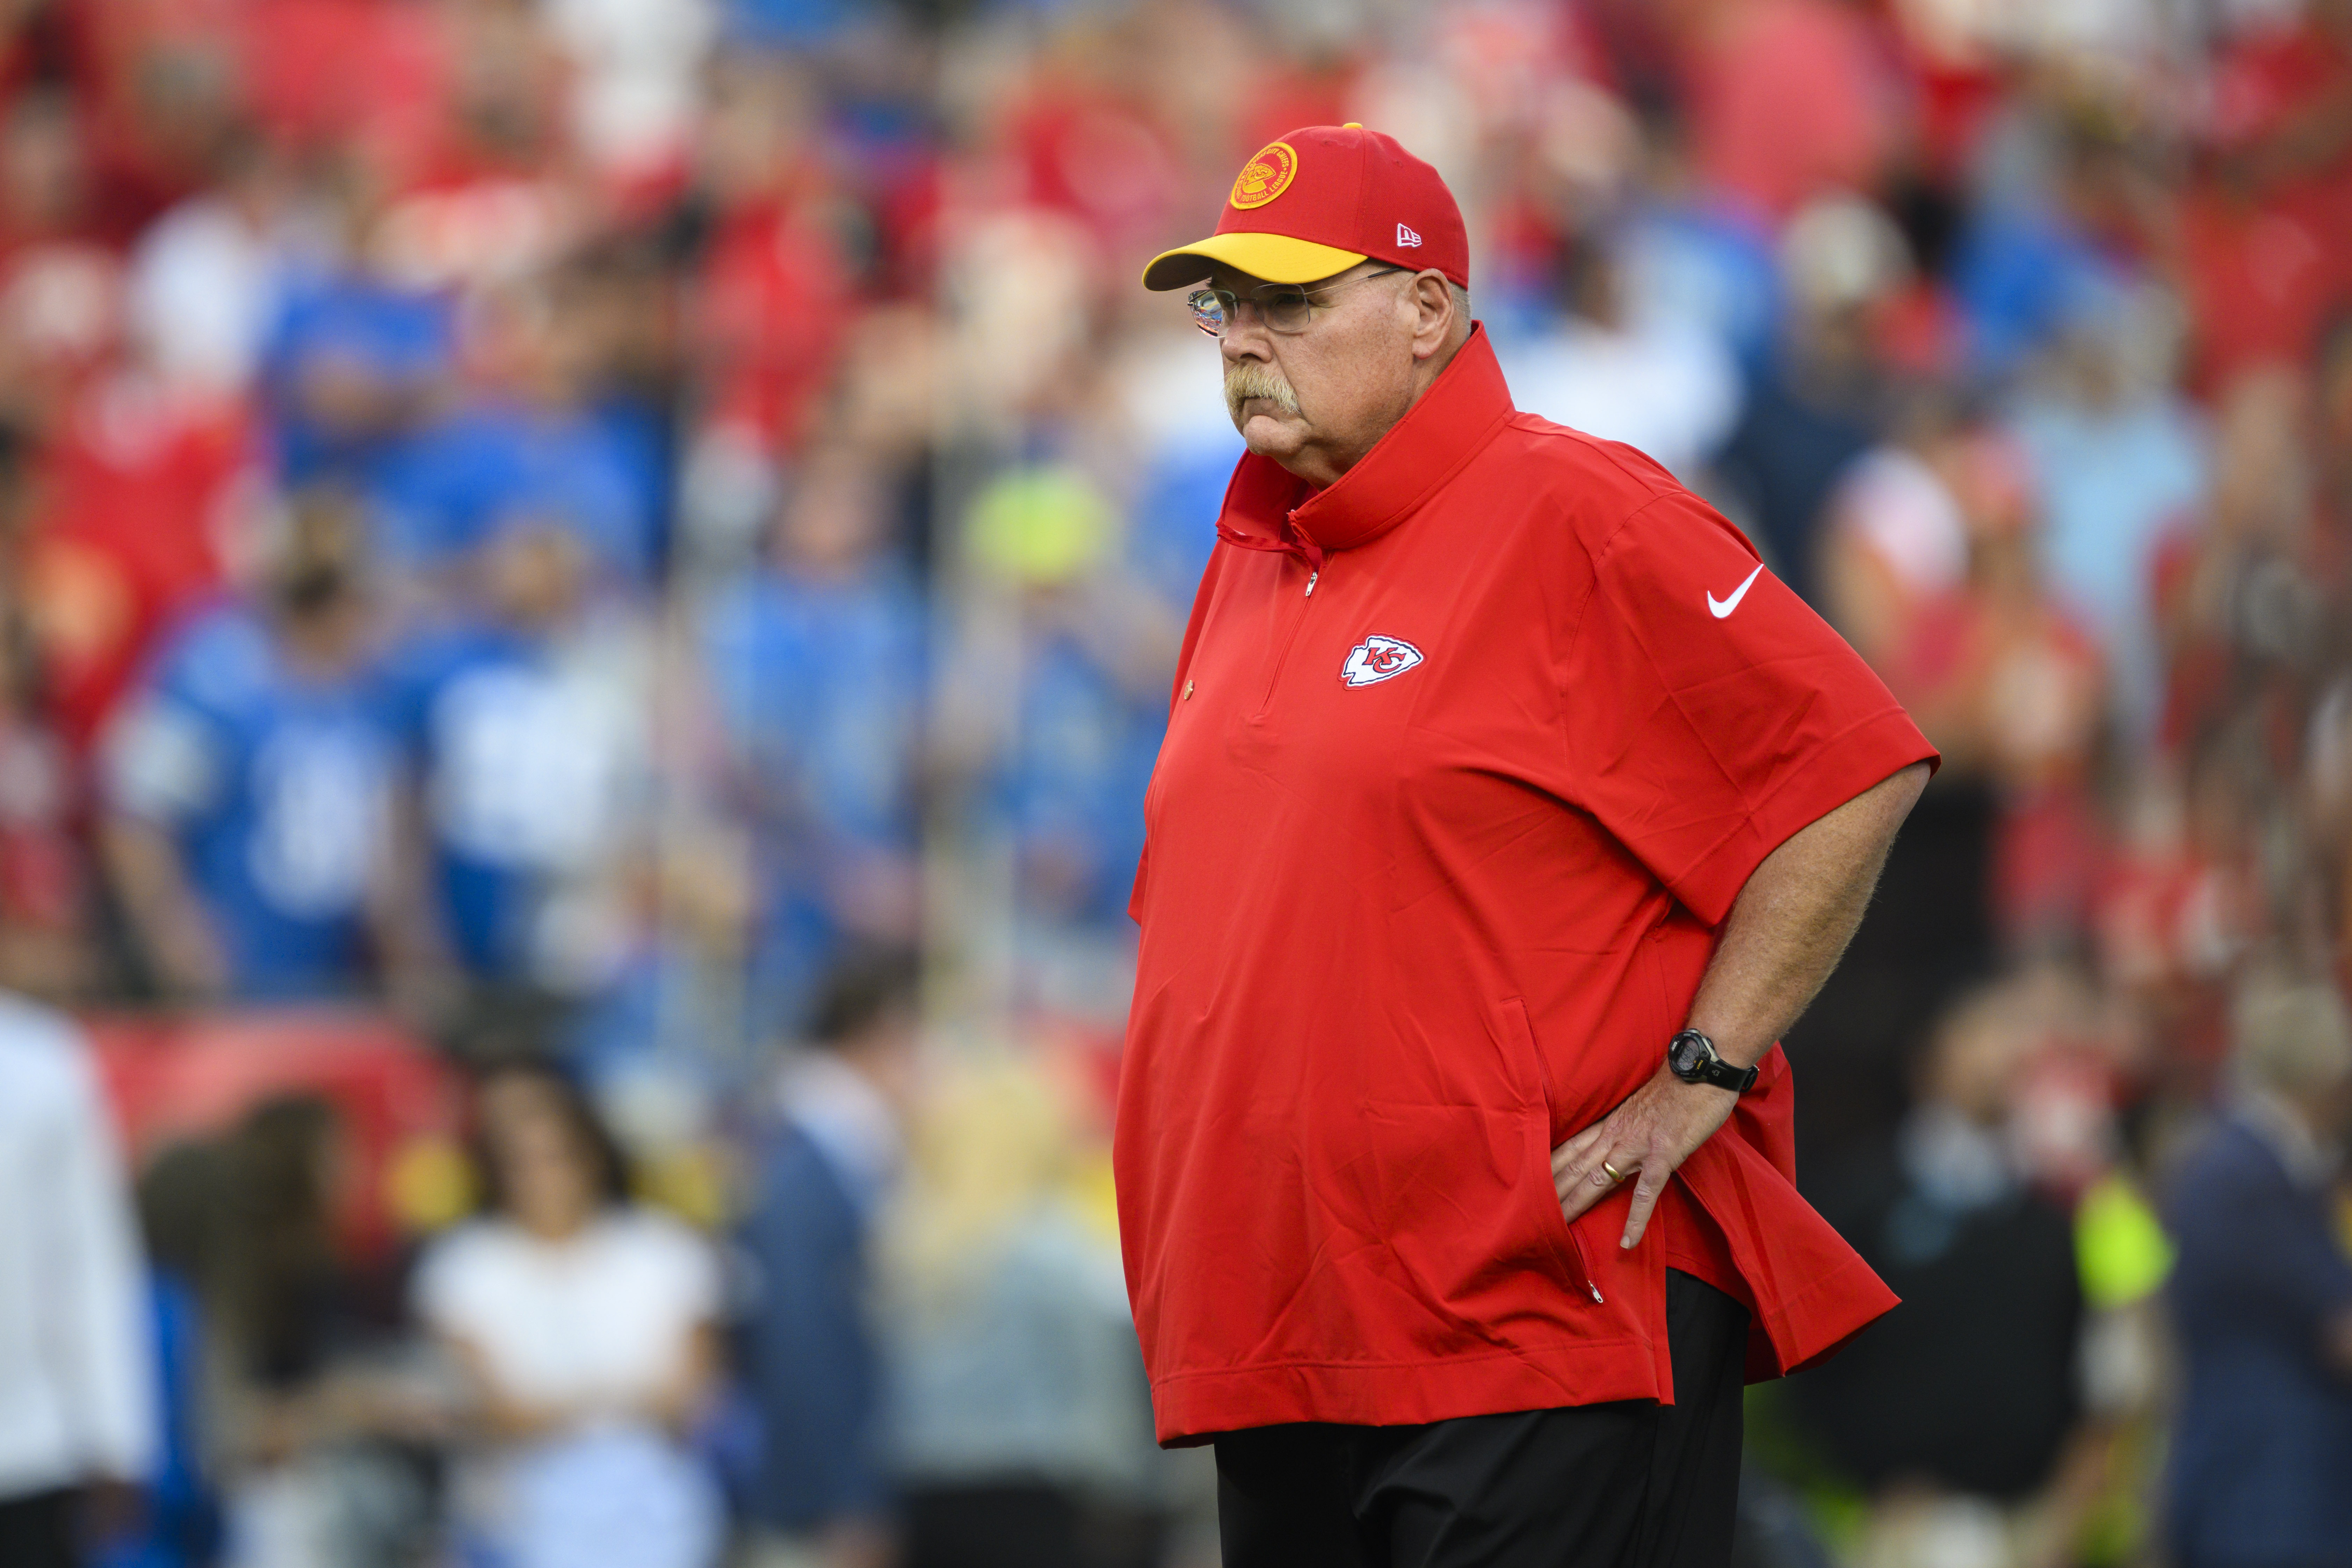 Why did Andy Reid go for 4th and 25 in crunch time against Detroit Lions?